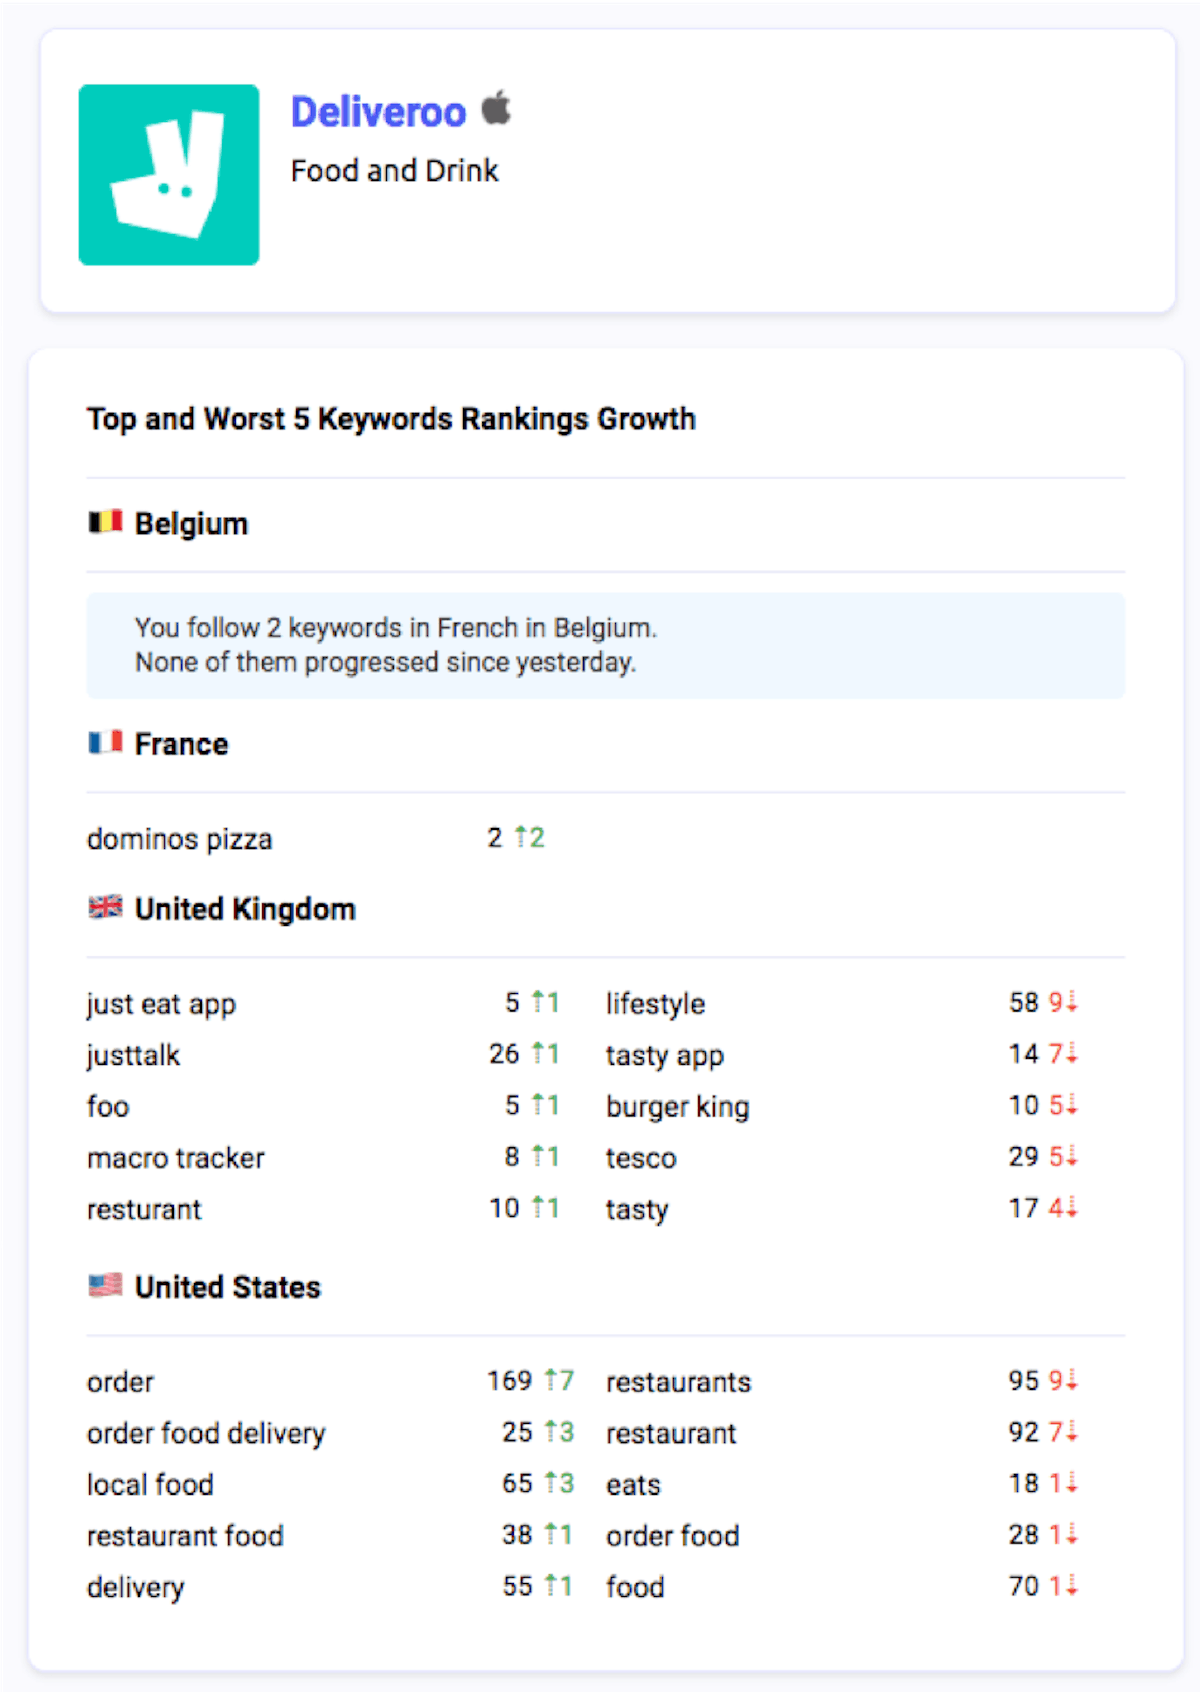 Deliveroo's top and worst keyword ranking progressions since yesterday across 4 markets 